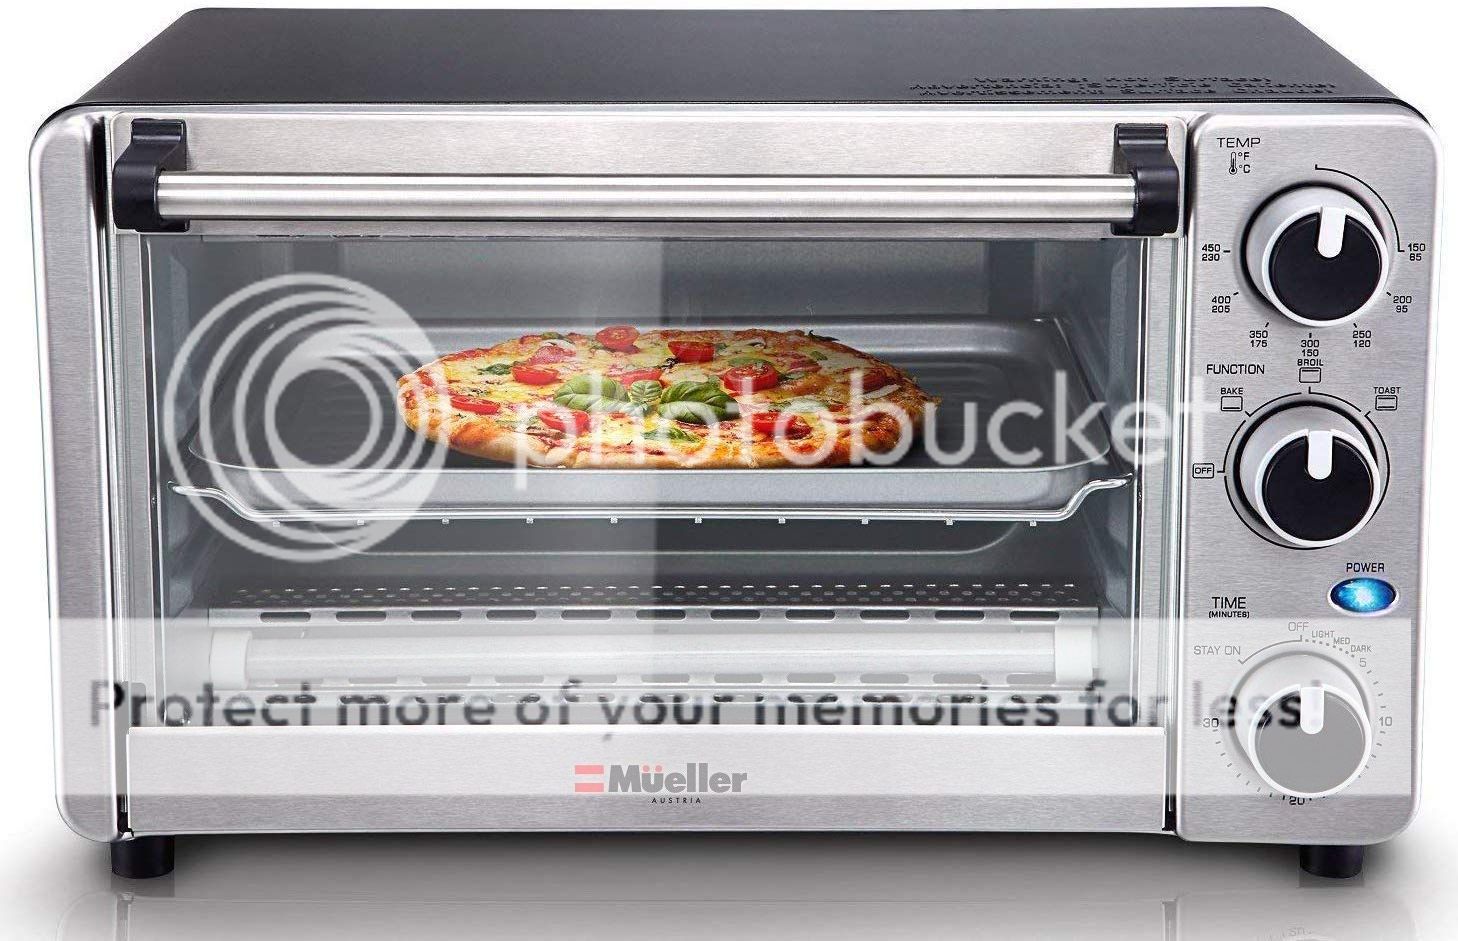 Mueller Austria Toaster Oven 4 Slice, Multi-function Stainless Steel Finish with Timer - Toast - Bake - Broil Settings, Natural Convection -